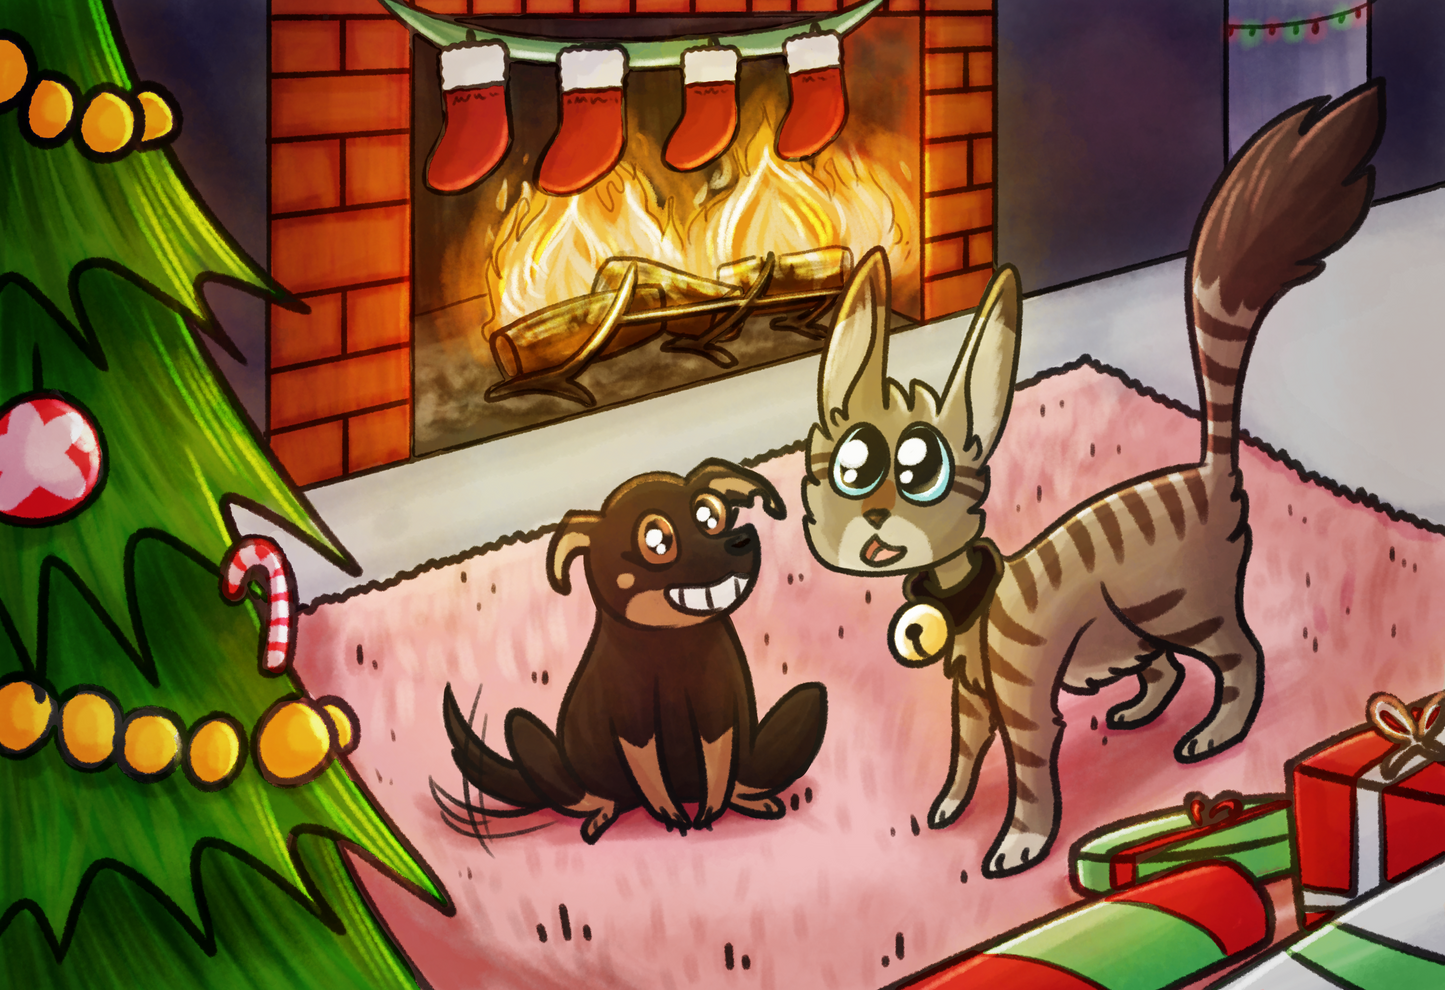 Sticky The Kitty; Volume 4 - A Very Sticky Christmas! Did Sticky mention, he LOVES Christmas? The PERFECT Christmas Eve story to get the kids ready for Santa's visit!